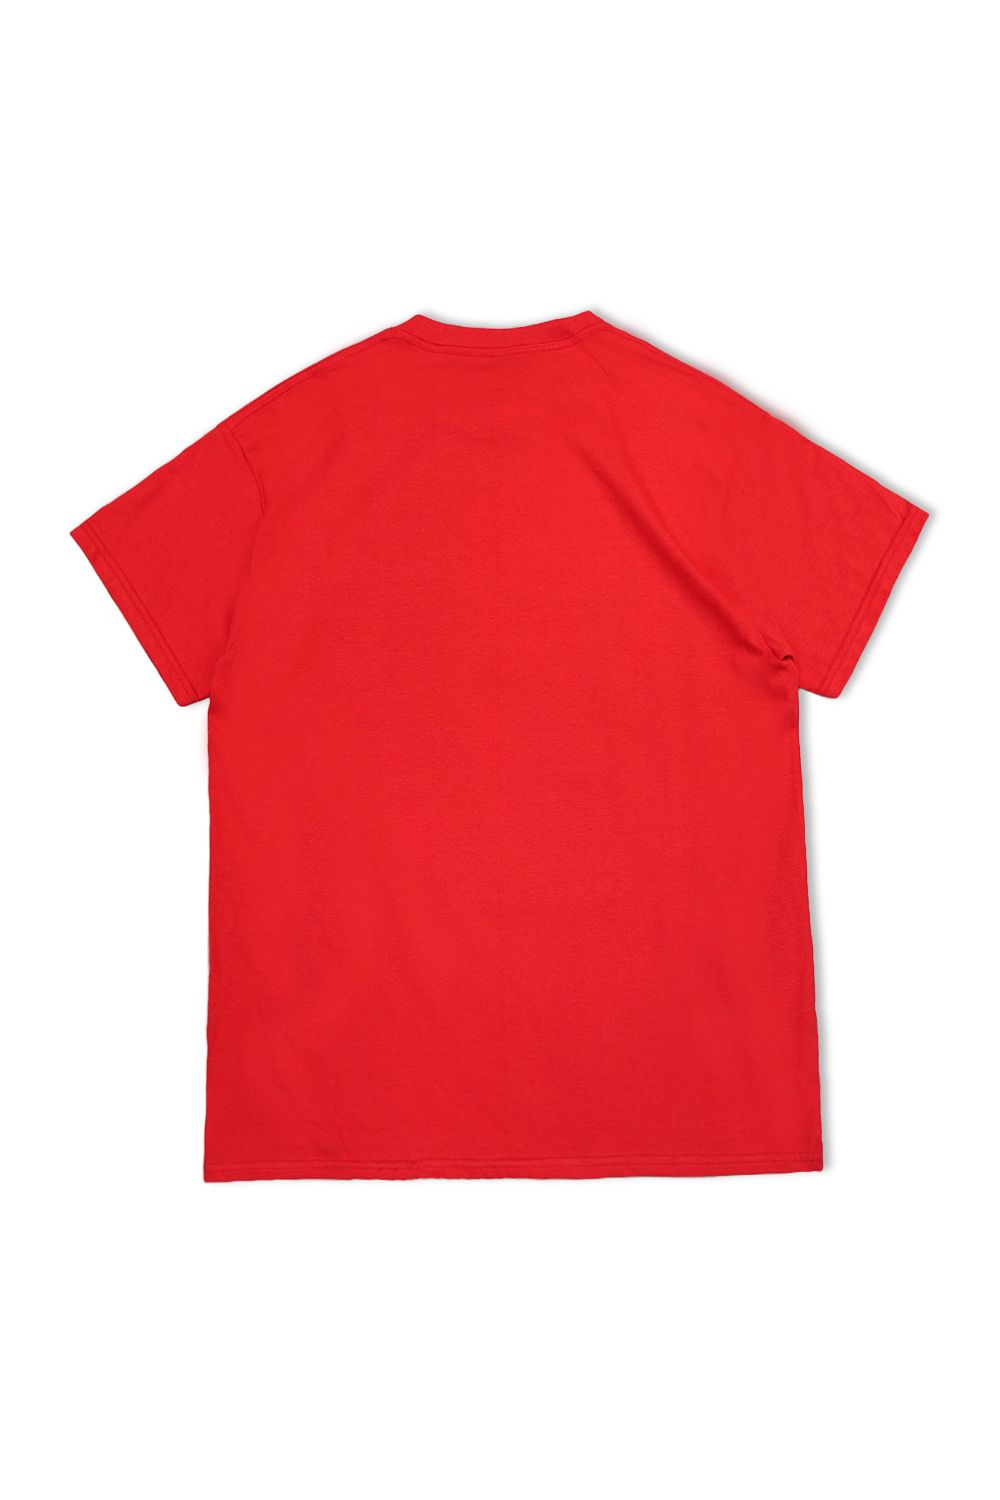 More Money No Problem Graphic T - Shirt - Red